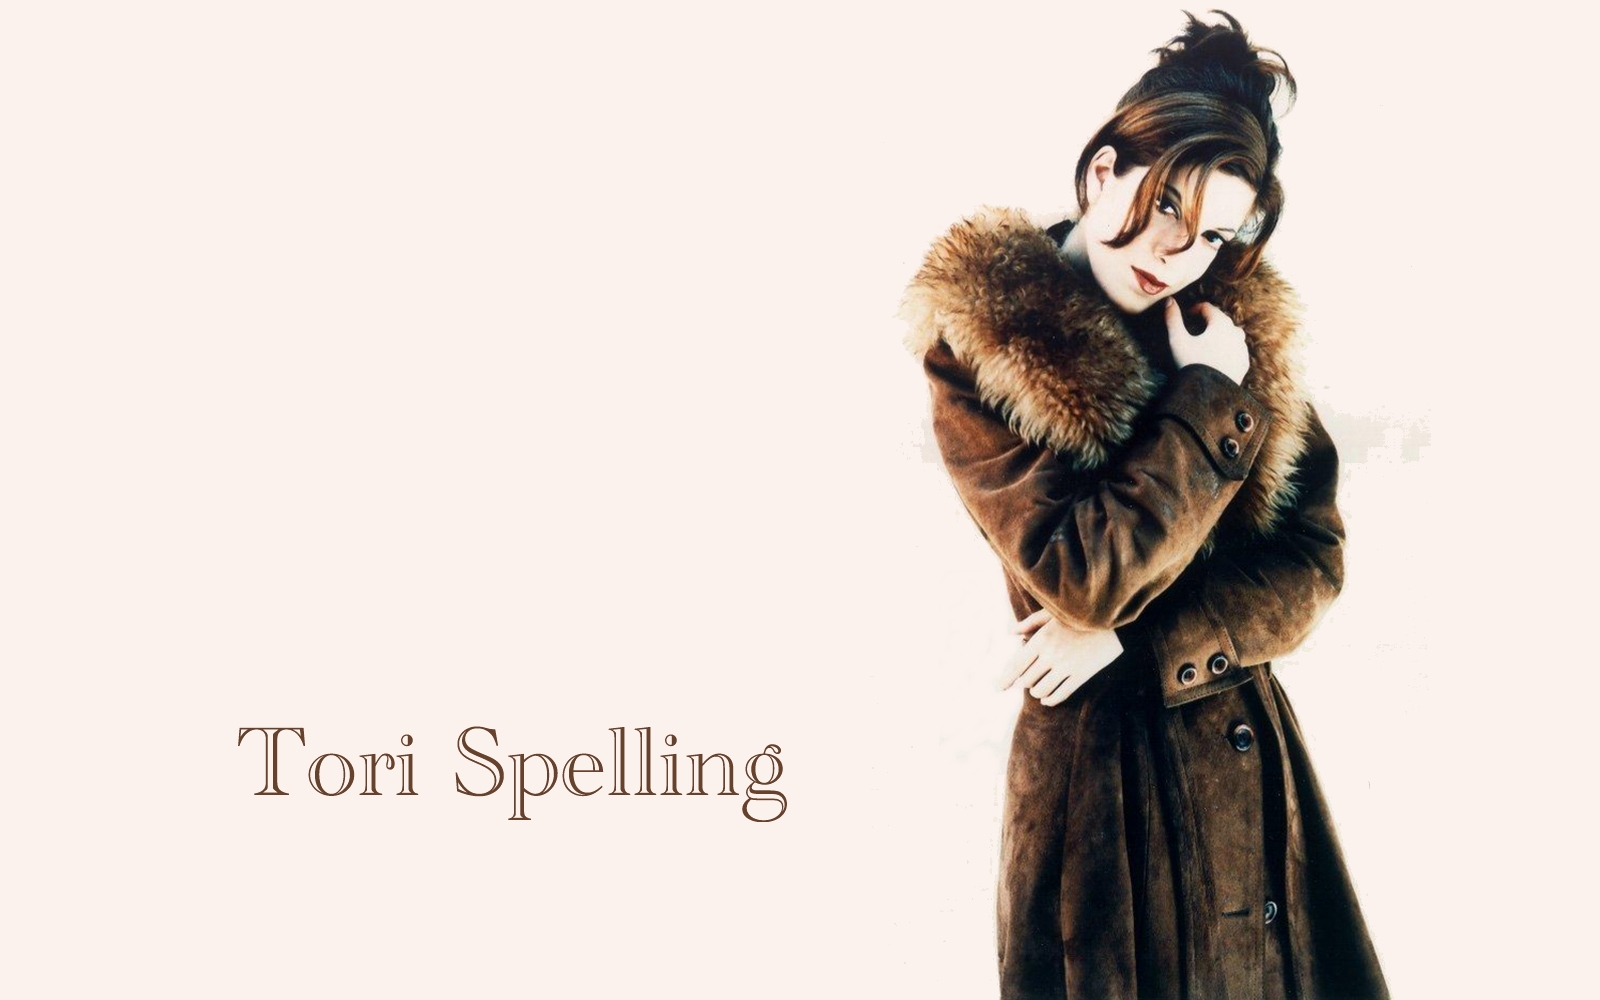 s spelling wallpaper,fur clothing,fur,fashion,outerwear,stole